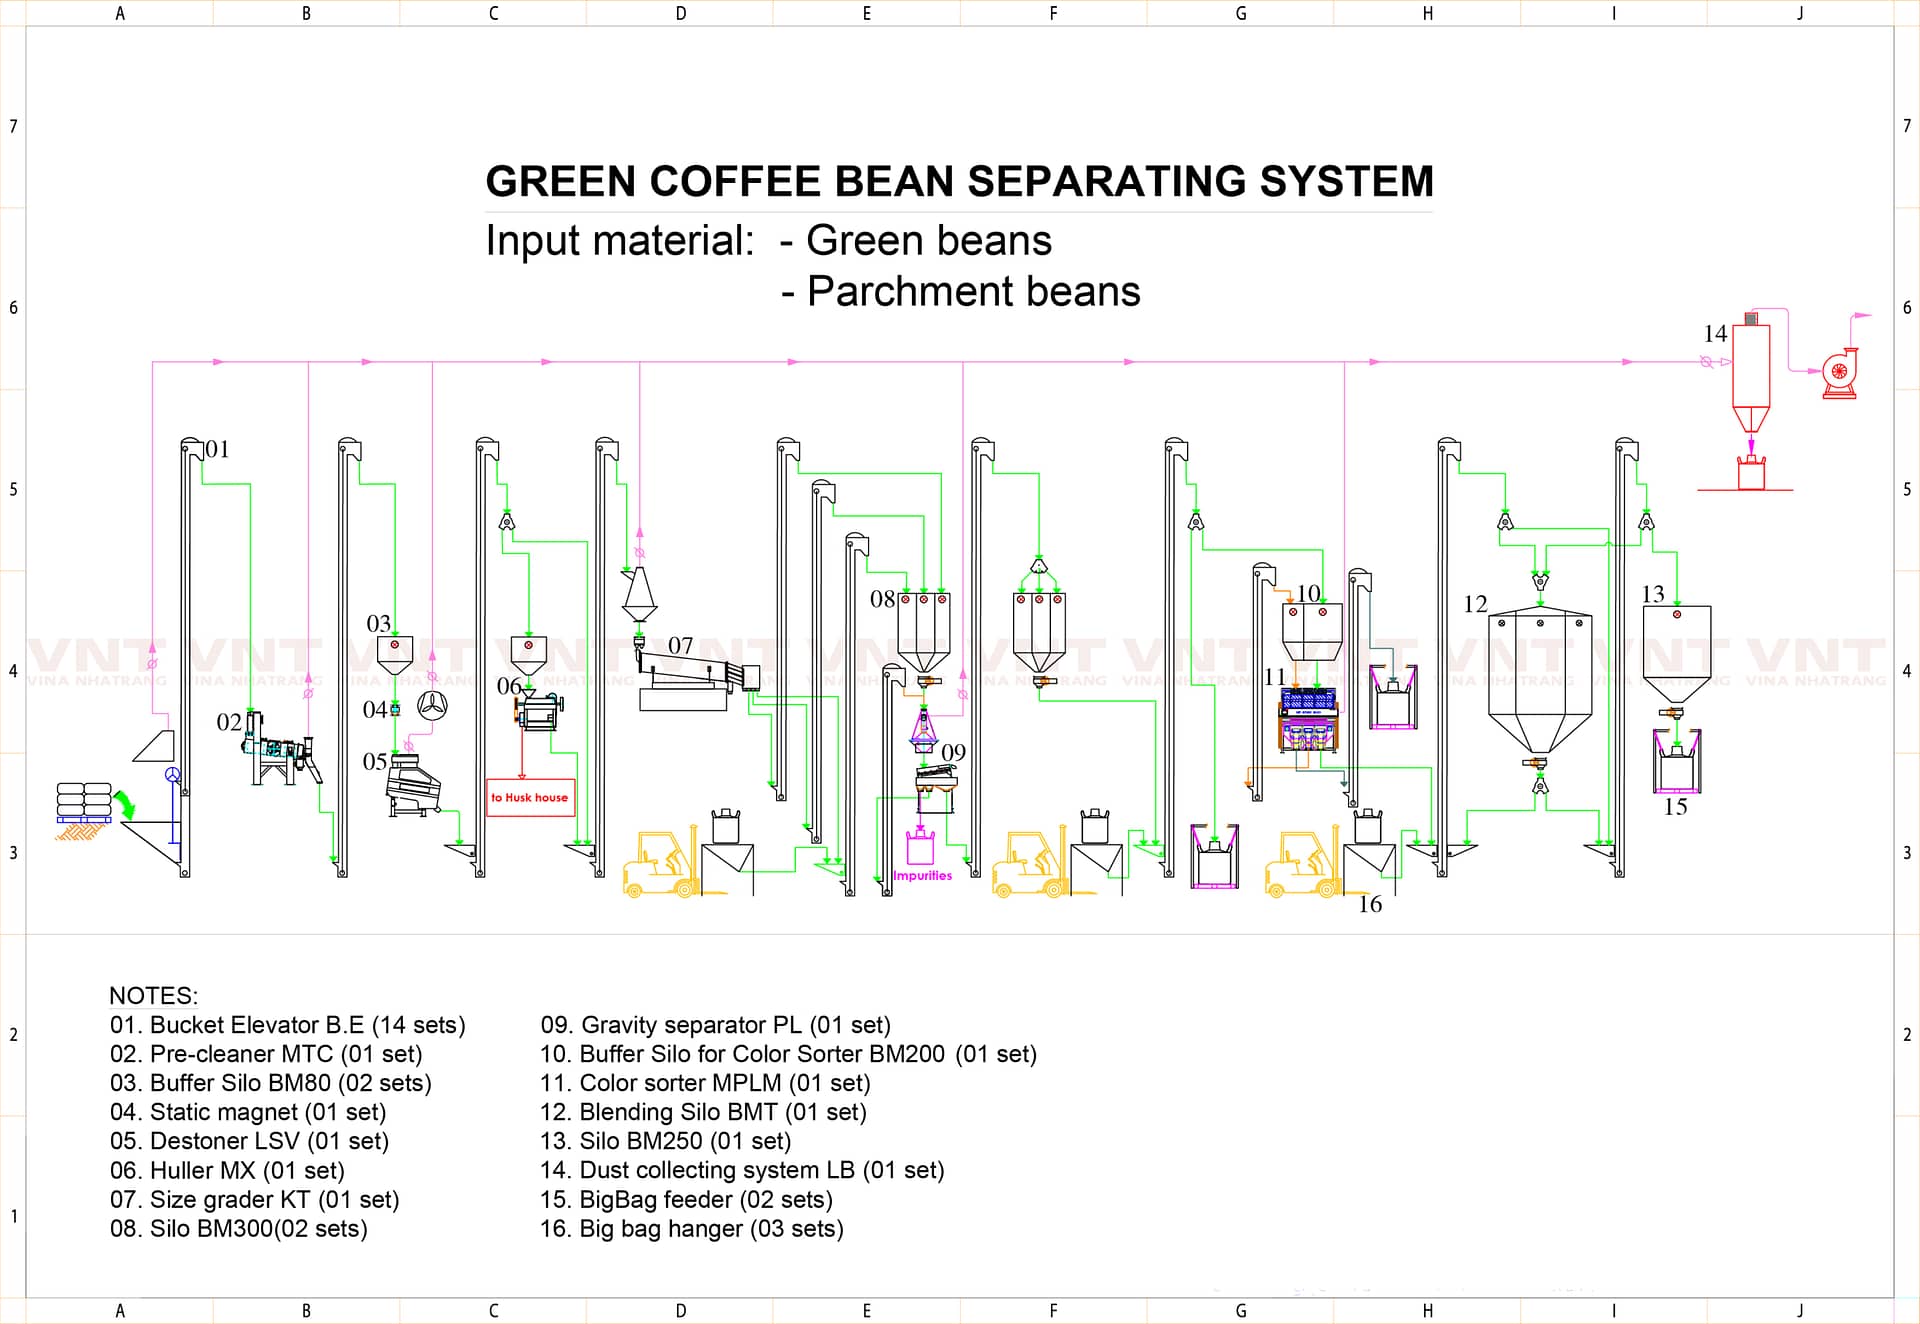 GREEN COFFEE BEAN PROCESSING SYSTEM